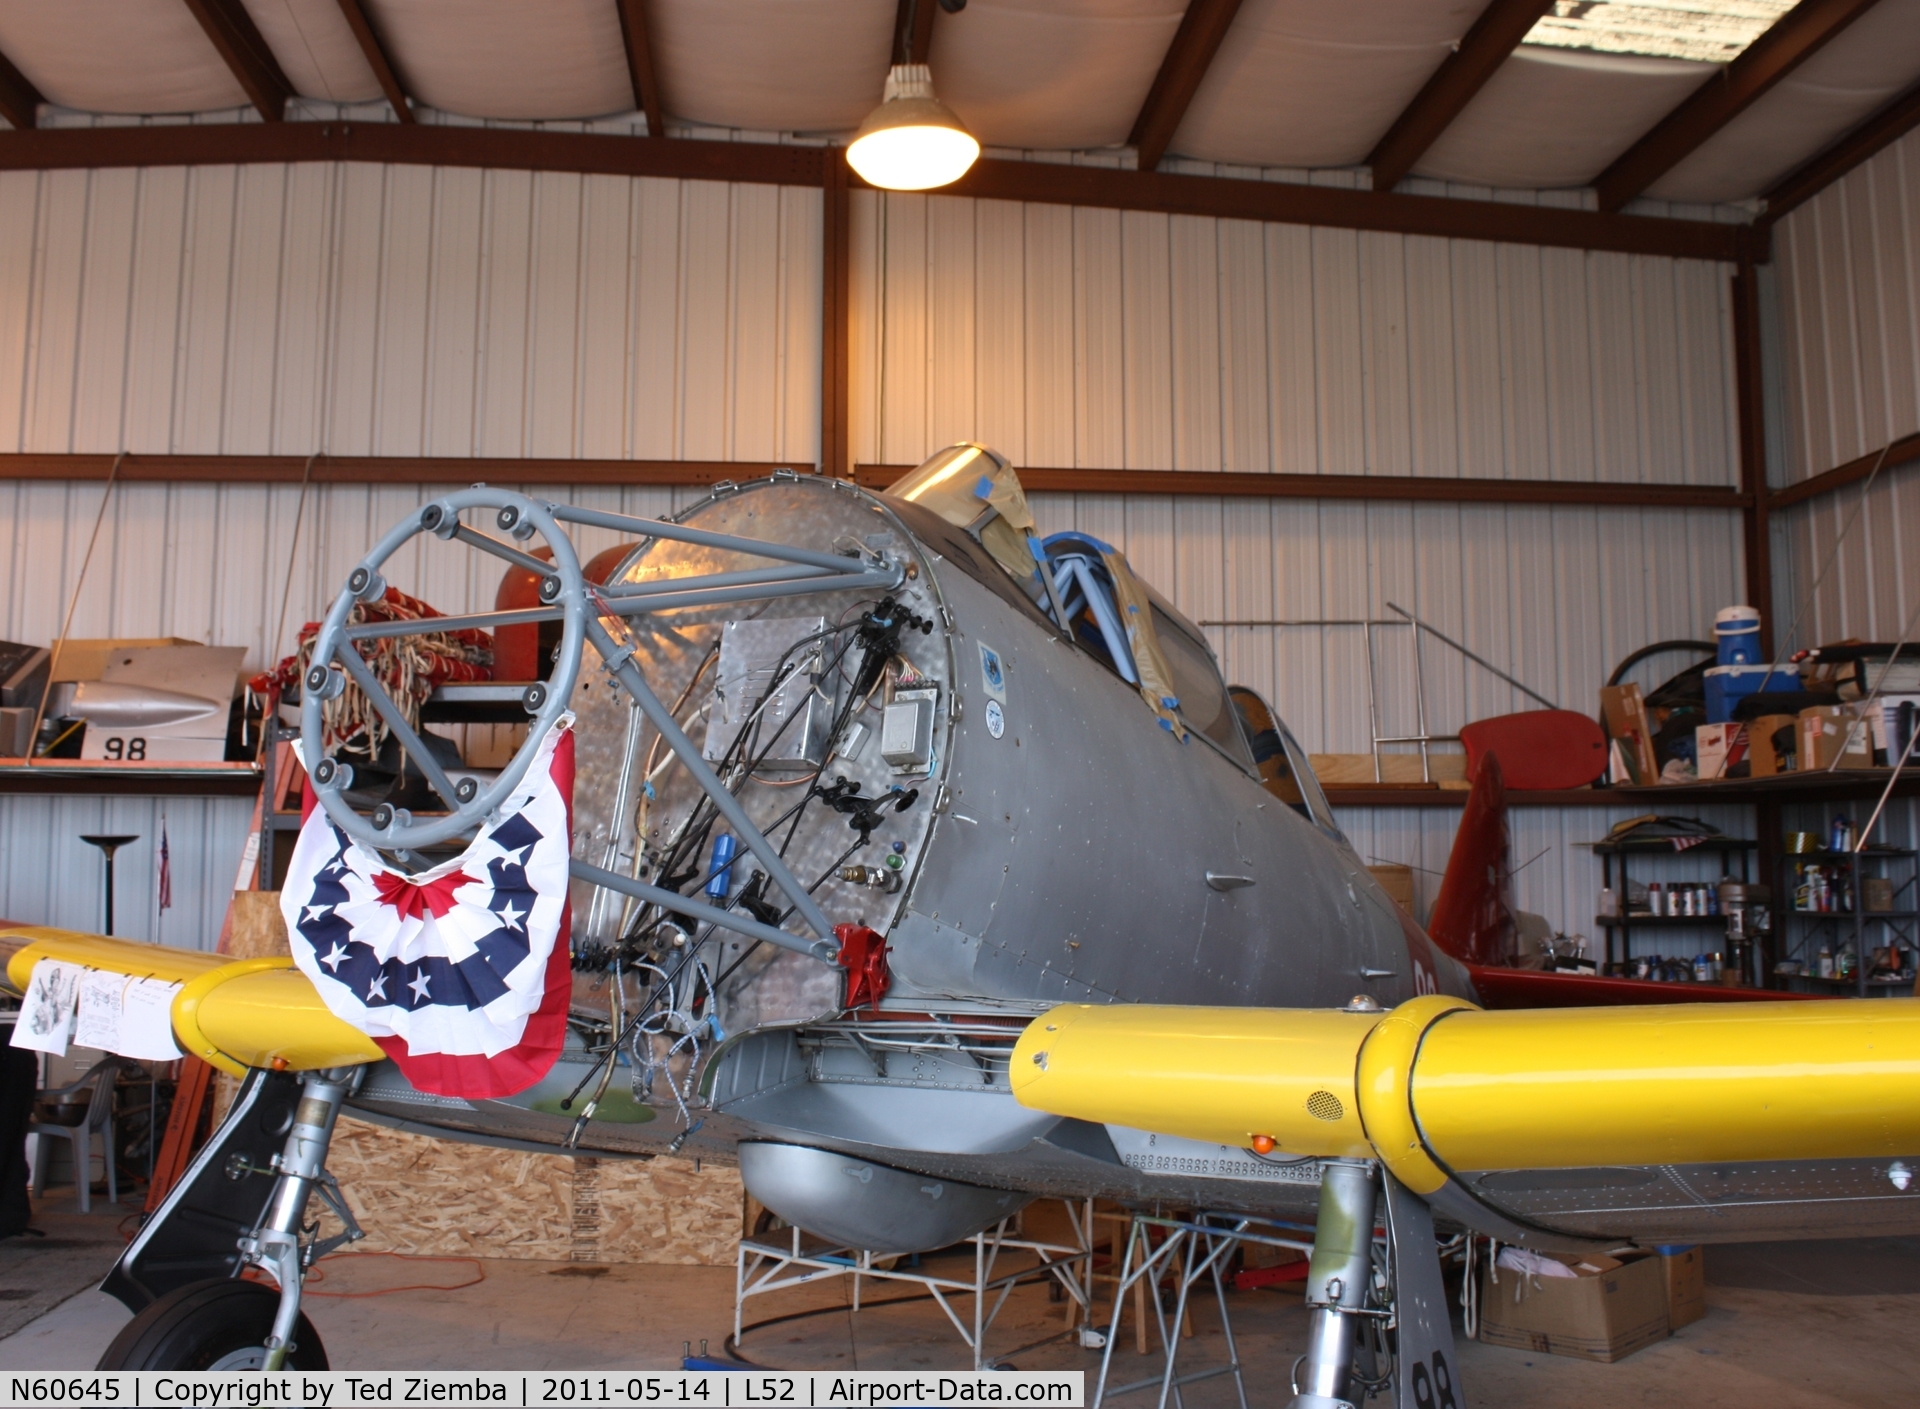 N60645, 1941 North American SNJ-2 C/N 79-3993, Currently under restoration at it's new home in Oceano, CA.